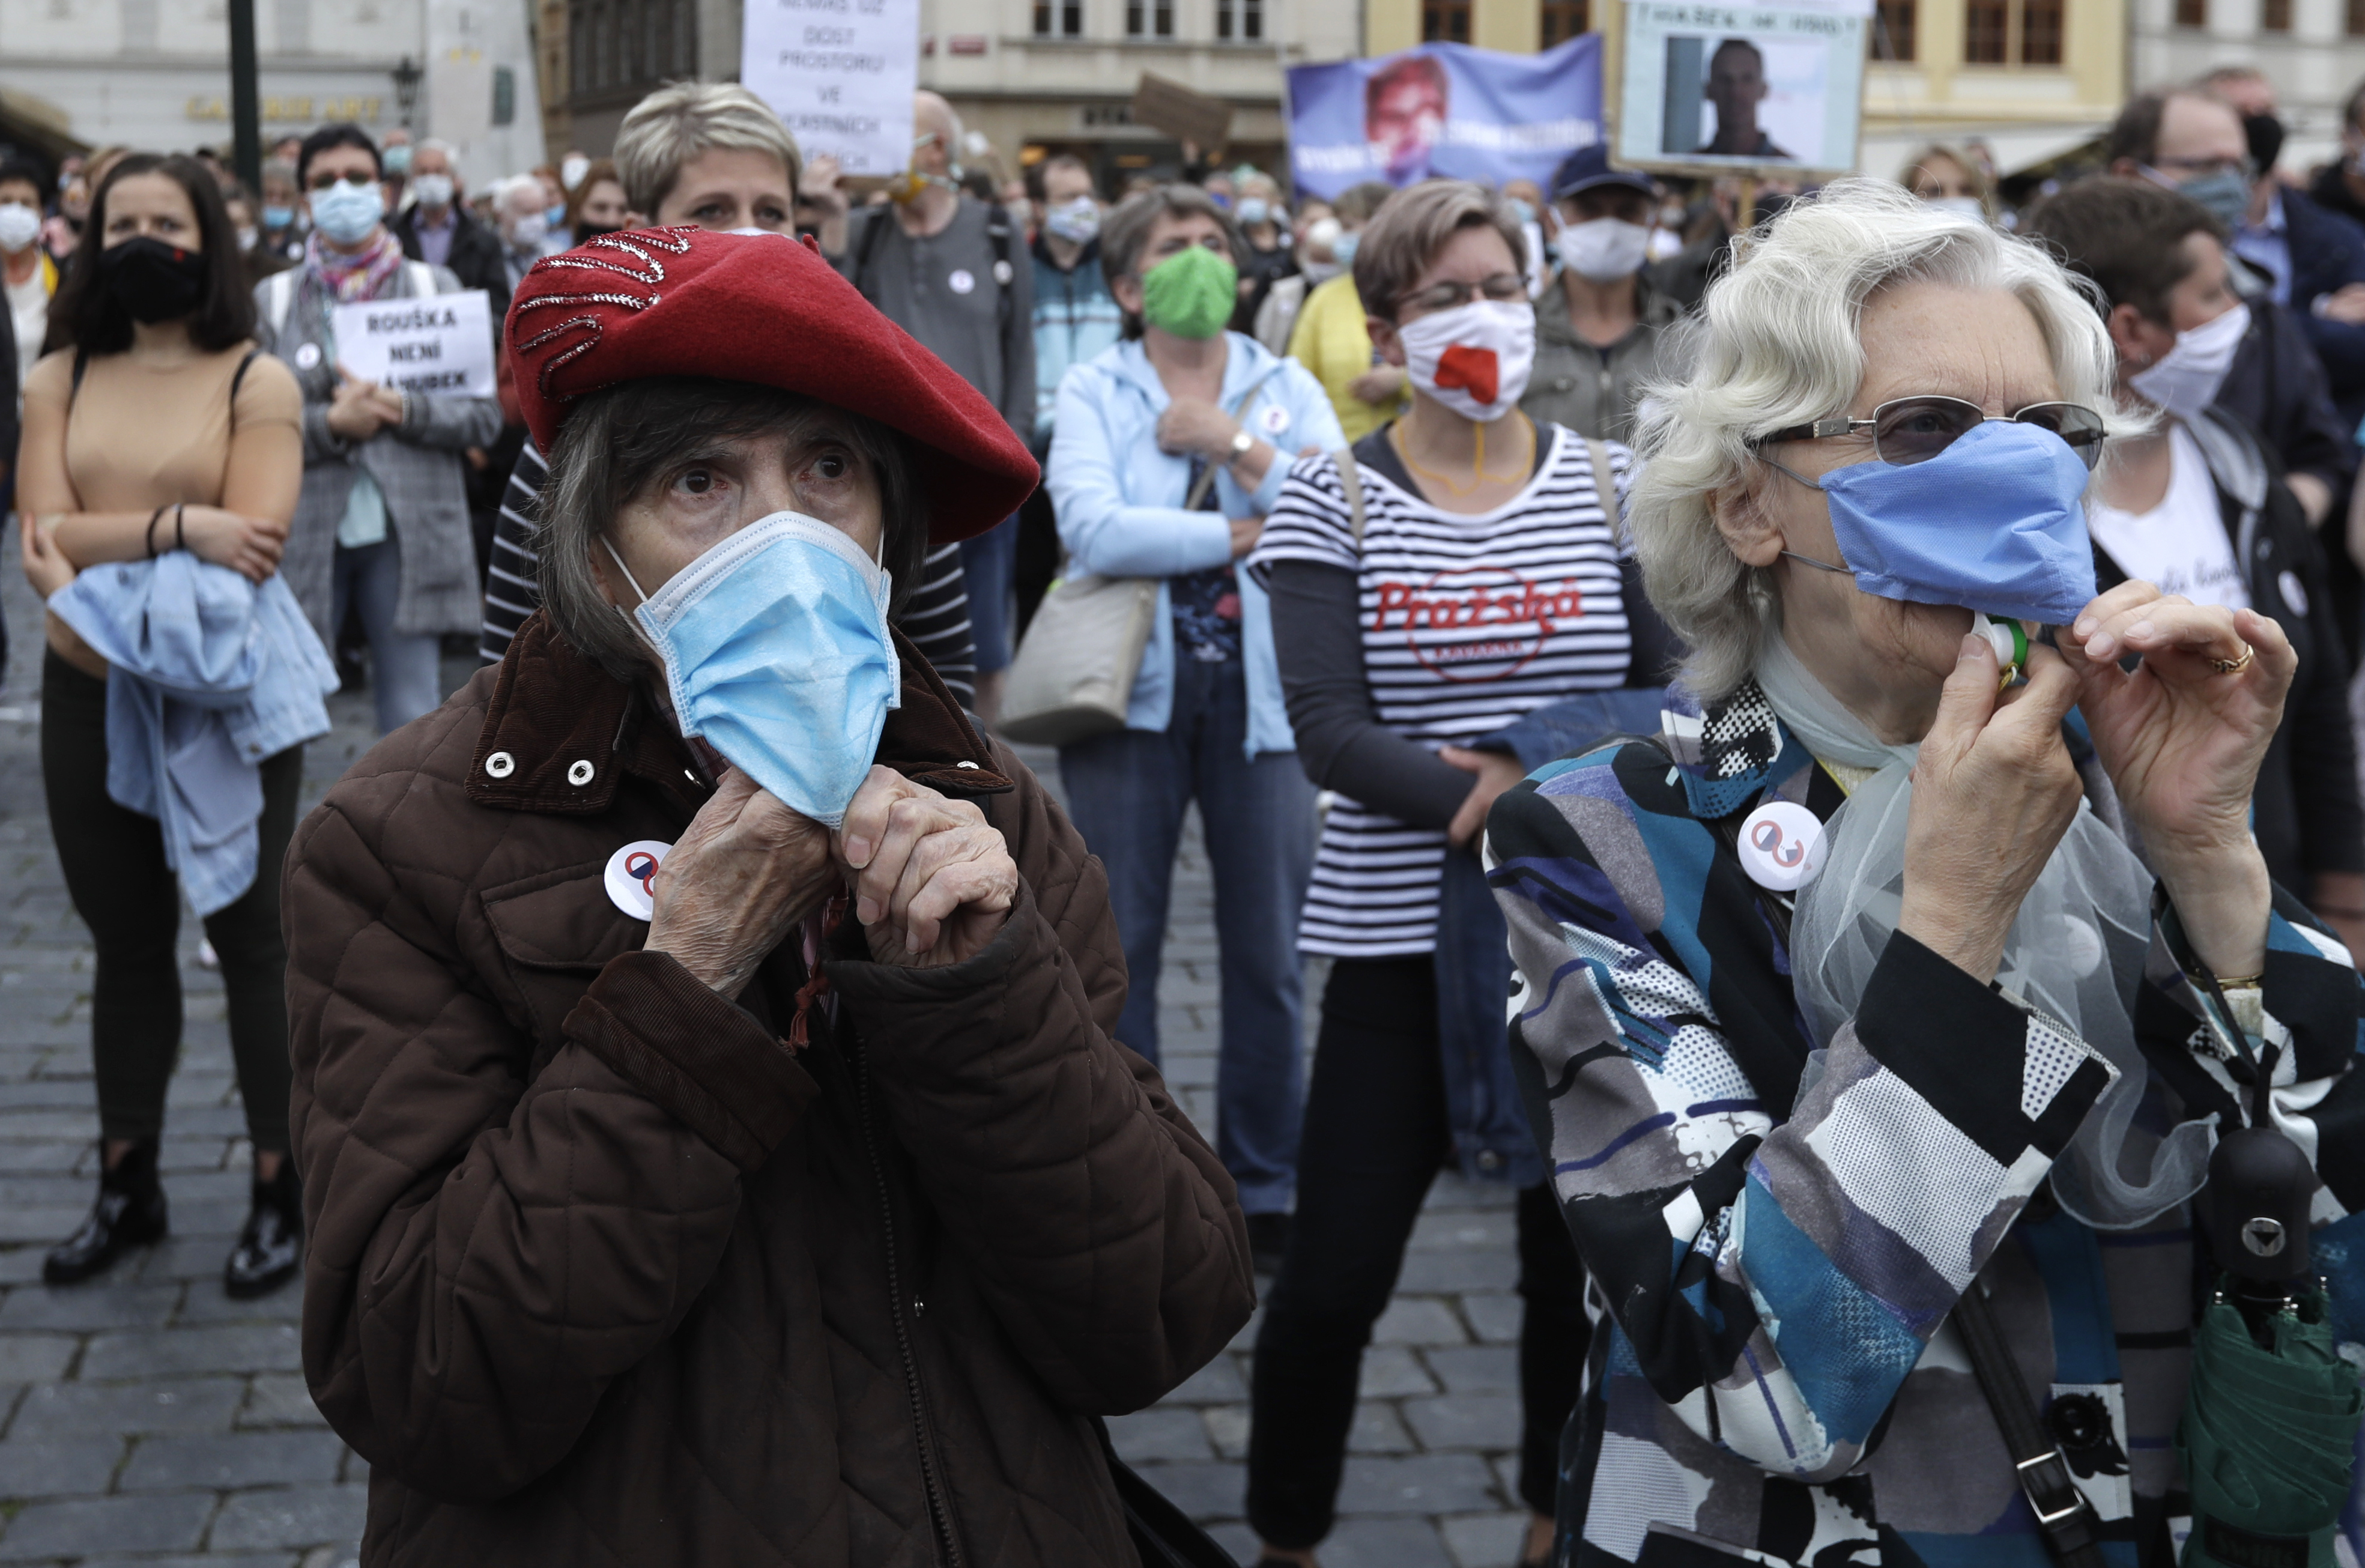 Elderly women wearing face masks to protect against coronavirus, blow whistles, during a protest at the Old Town Square in Prague, Czech Republic, Tuesday, June 9, 2020. Hundreds of people protested in the Czech capital to draw attention to the government's insufficient and chaotic response to the coronavirus outbreak and other financial issues. Photo: AP